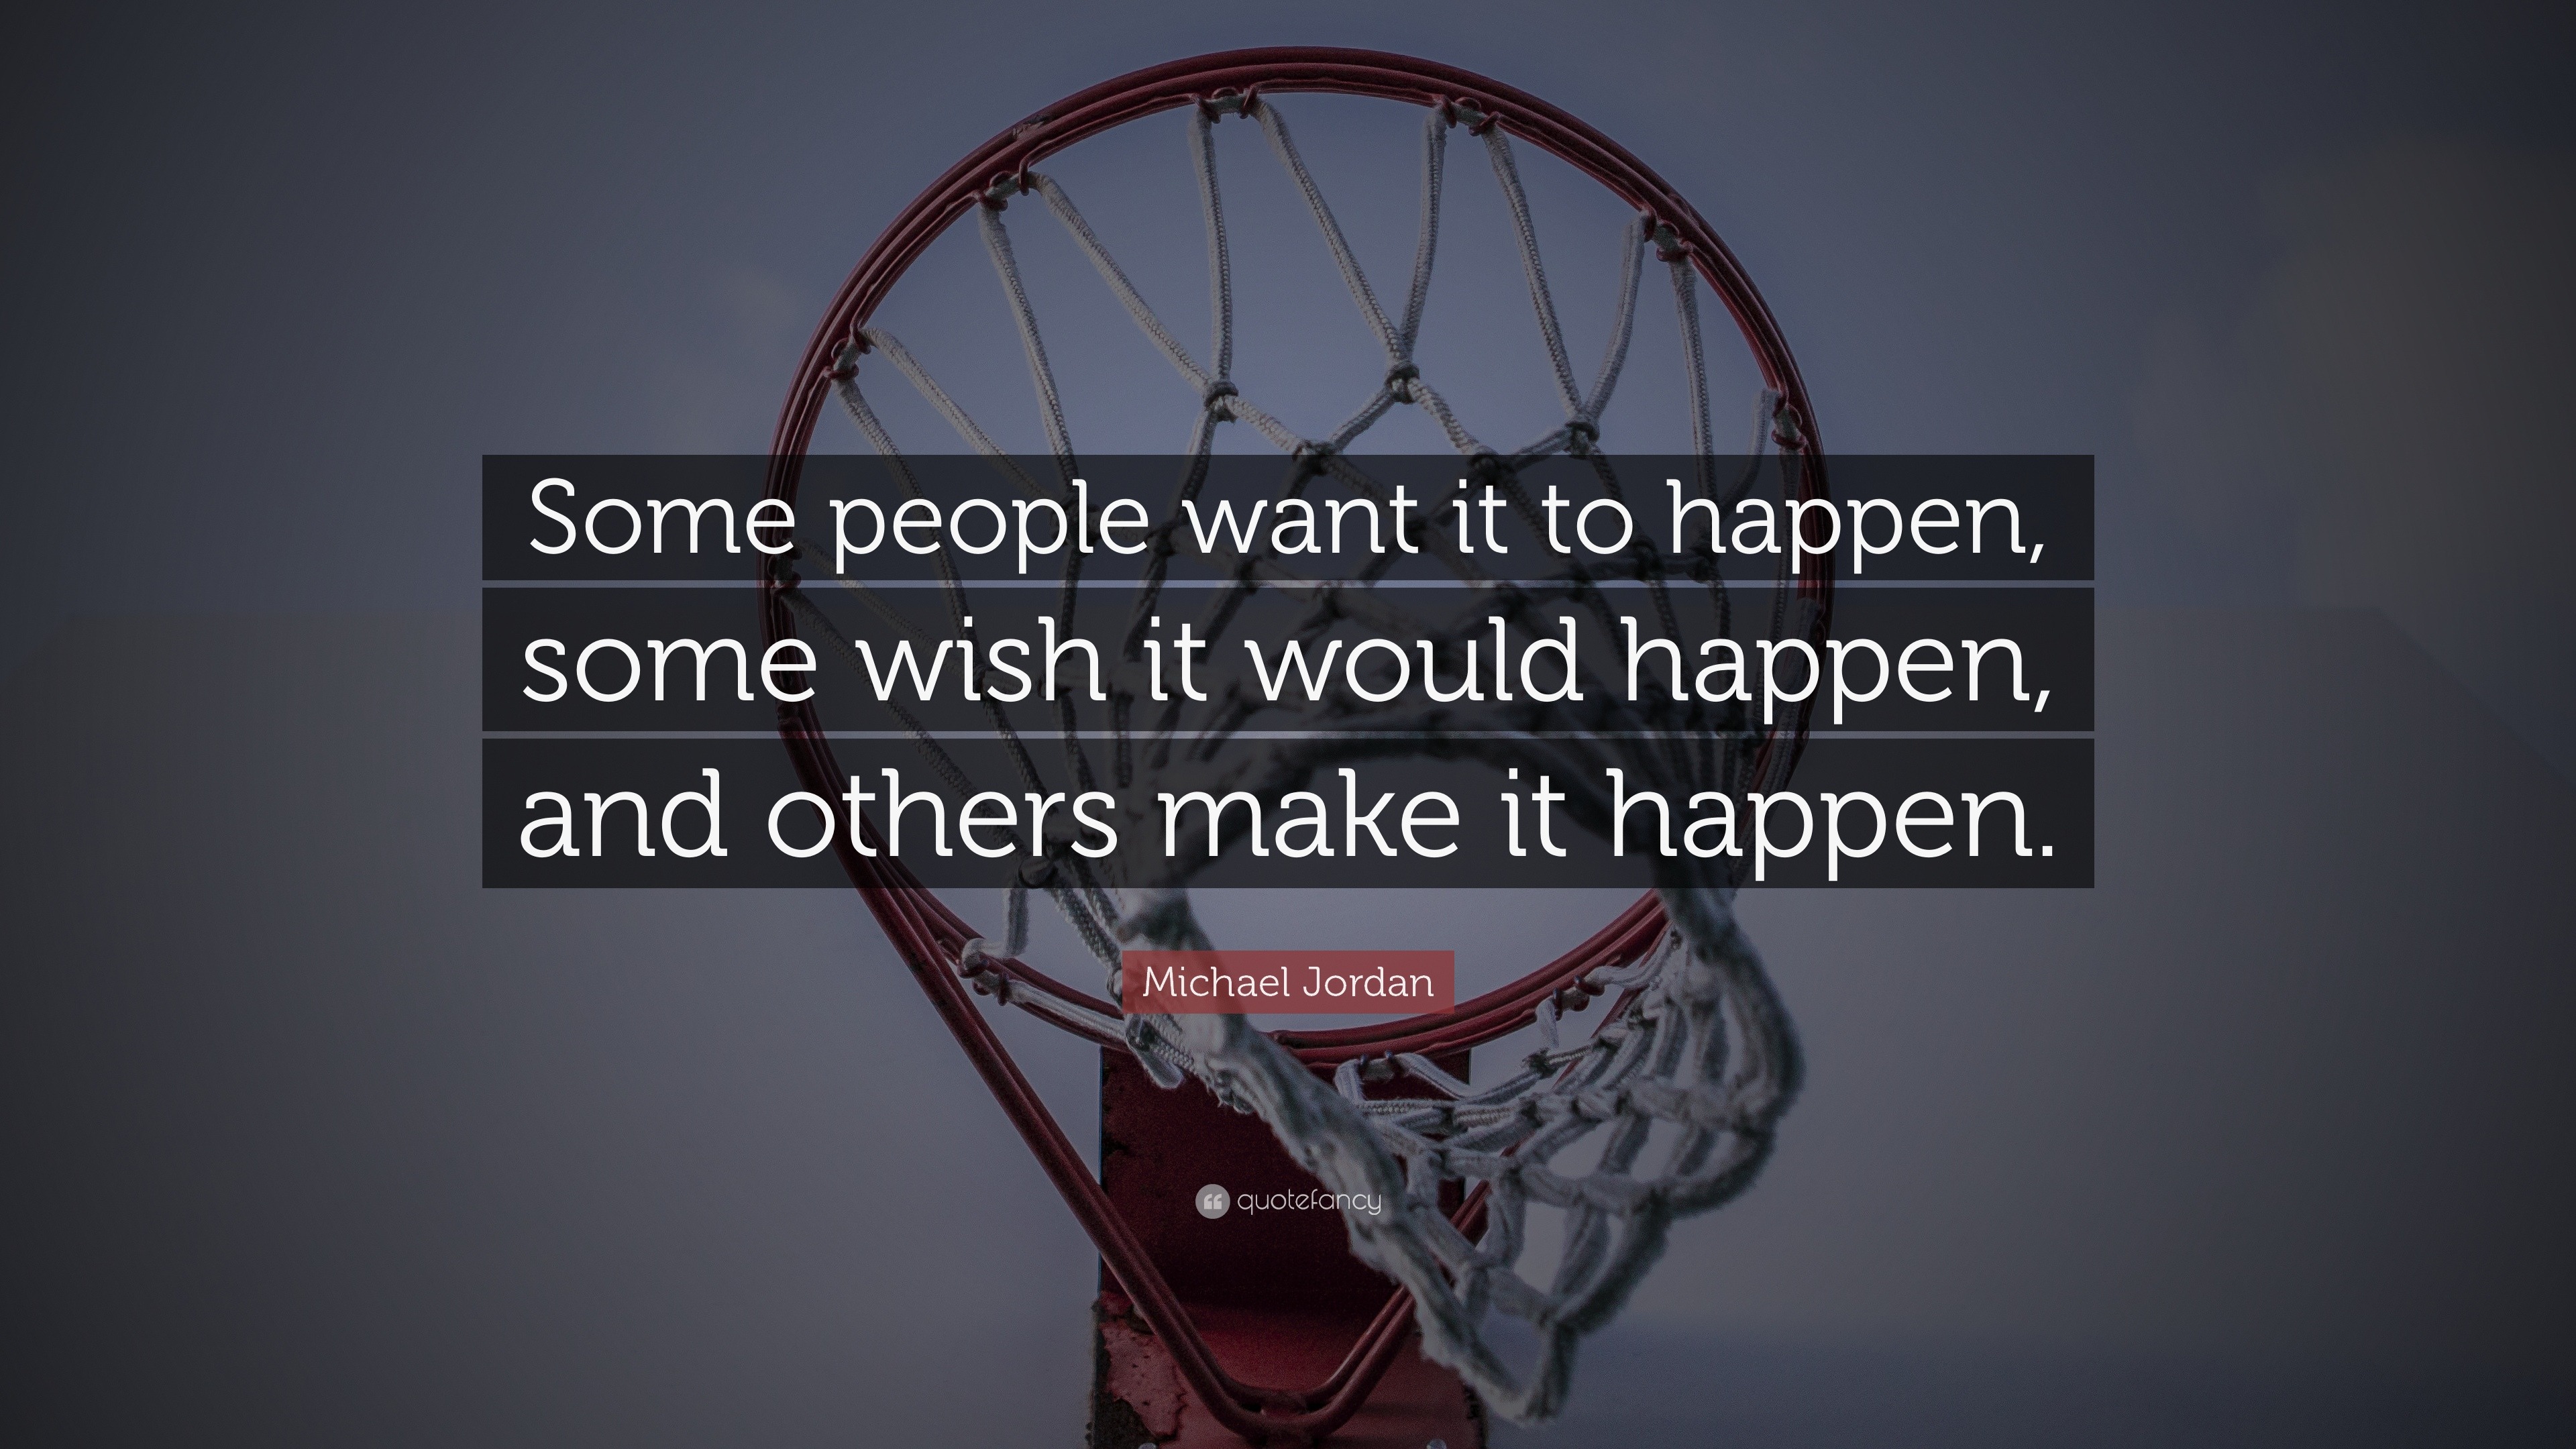 what will happen will happen quotes